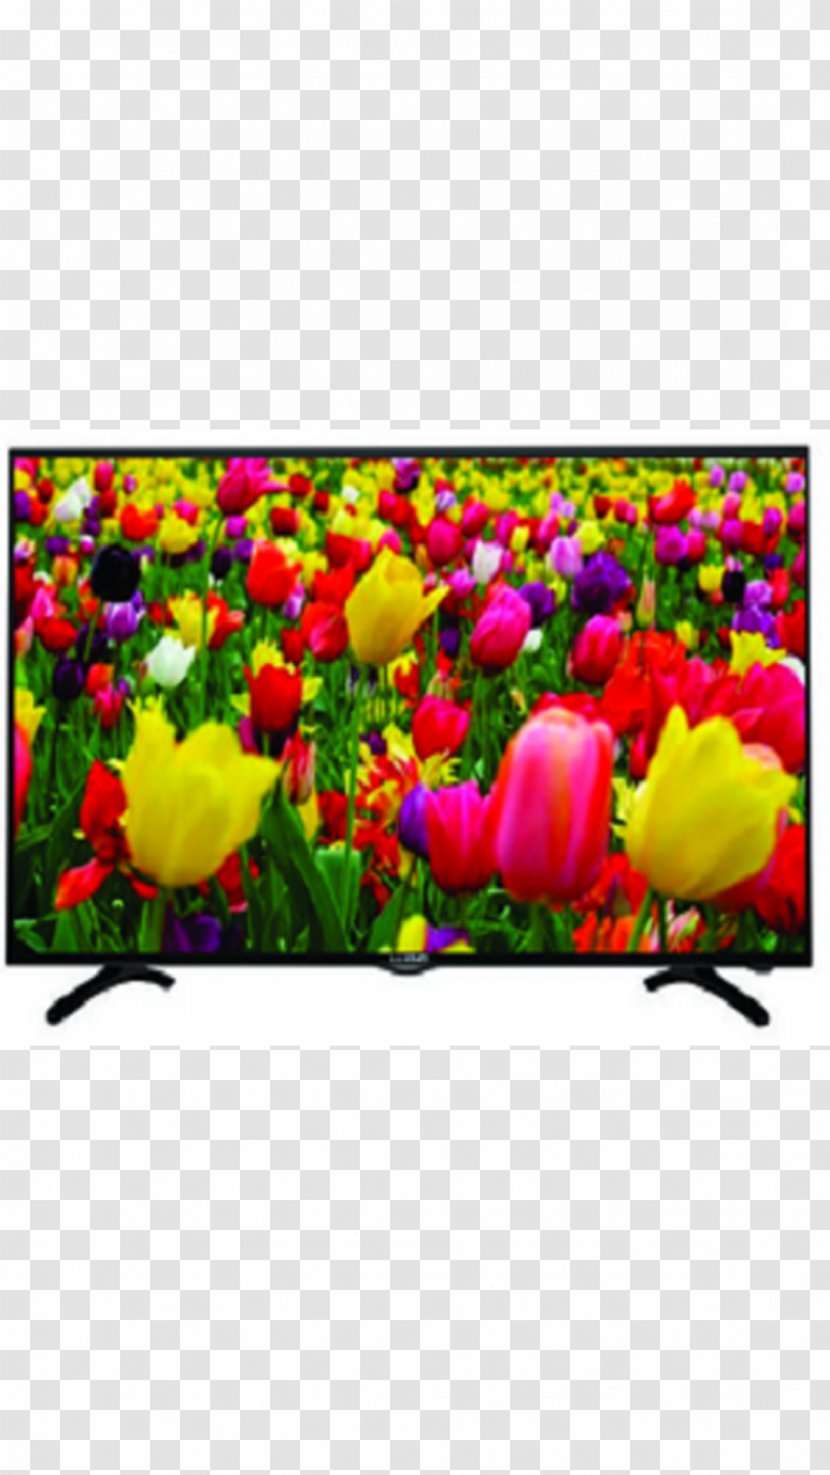 LED-backlit LCD High-definition Television HD Ready 1080p - Plant - Led Tv Transparent PNG